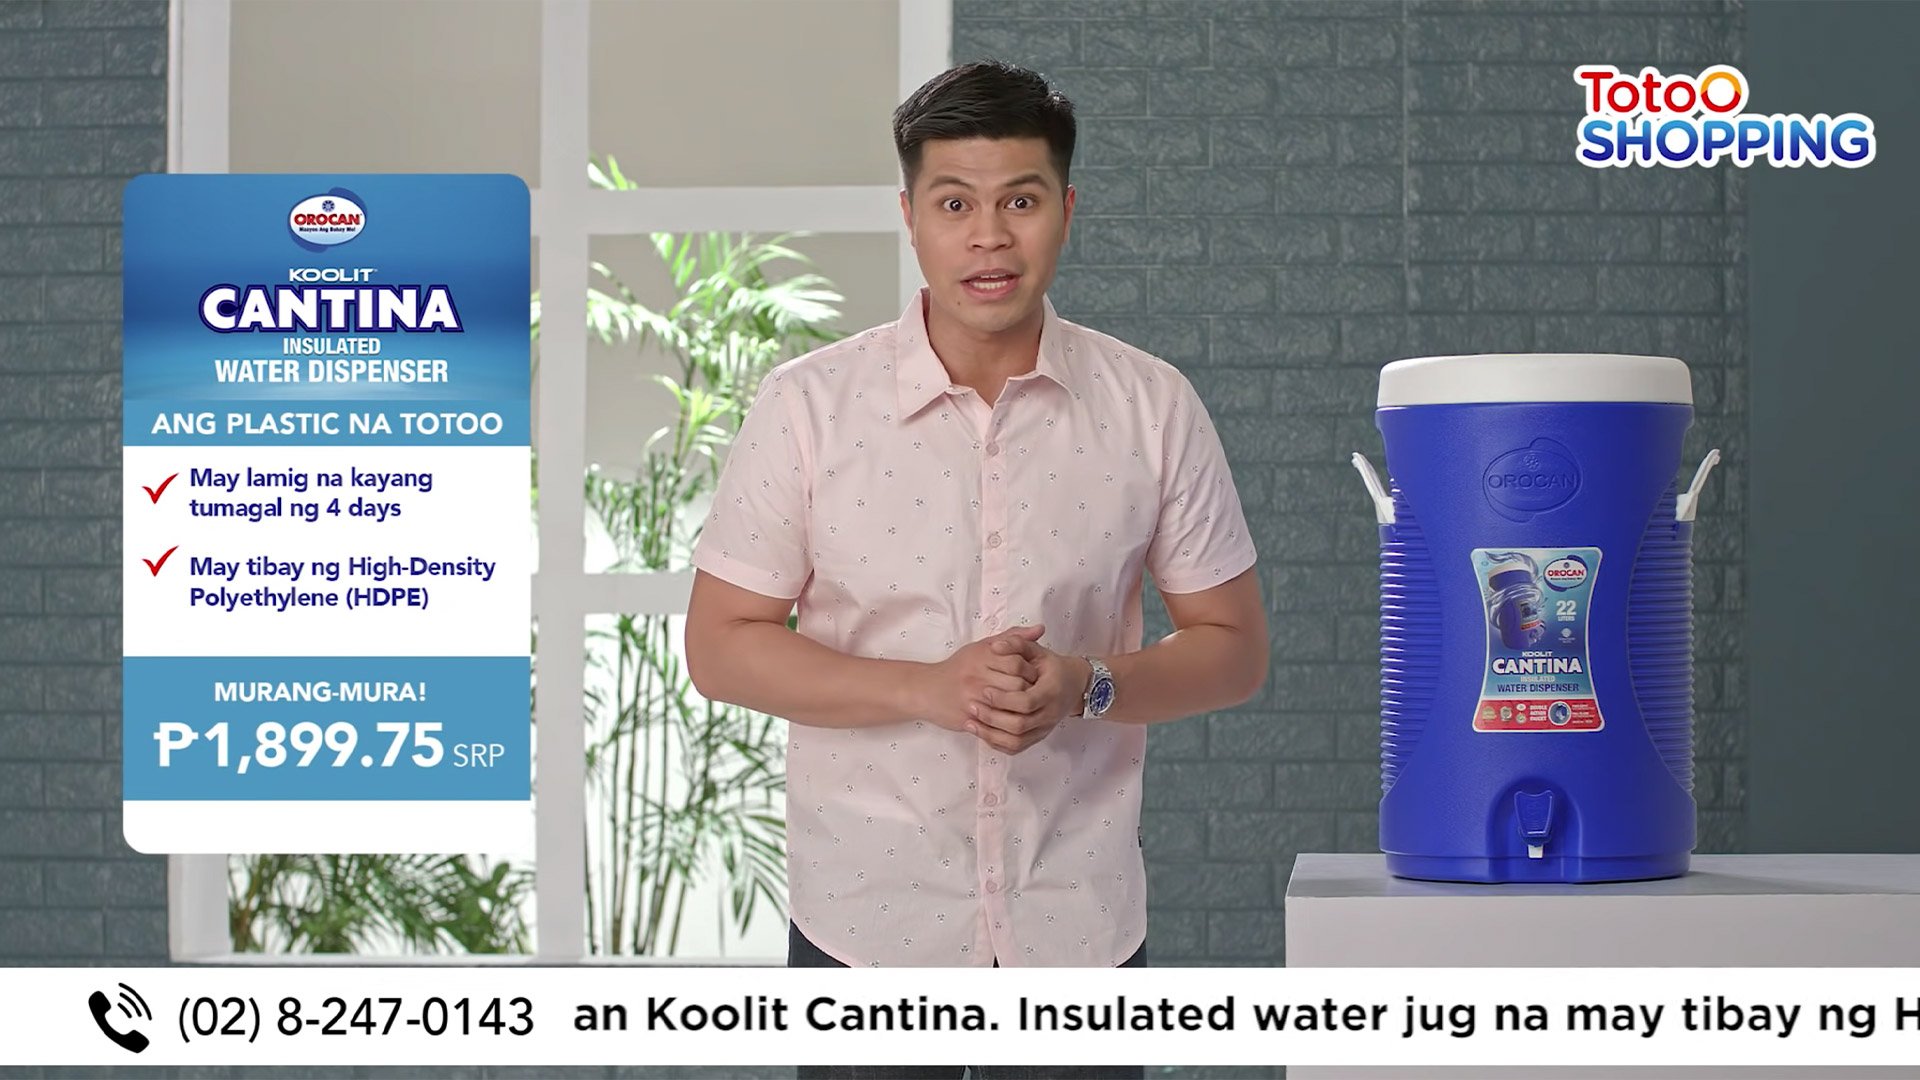 GIGIL’s TotoO Shopping ad for Orocan issues the real pros and cons of the Koolit Cantina